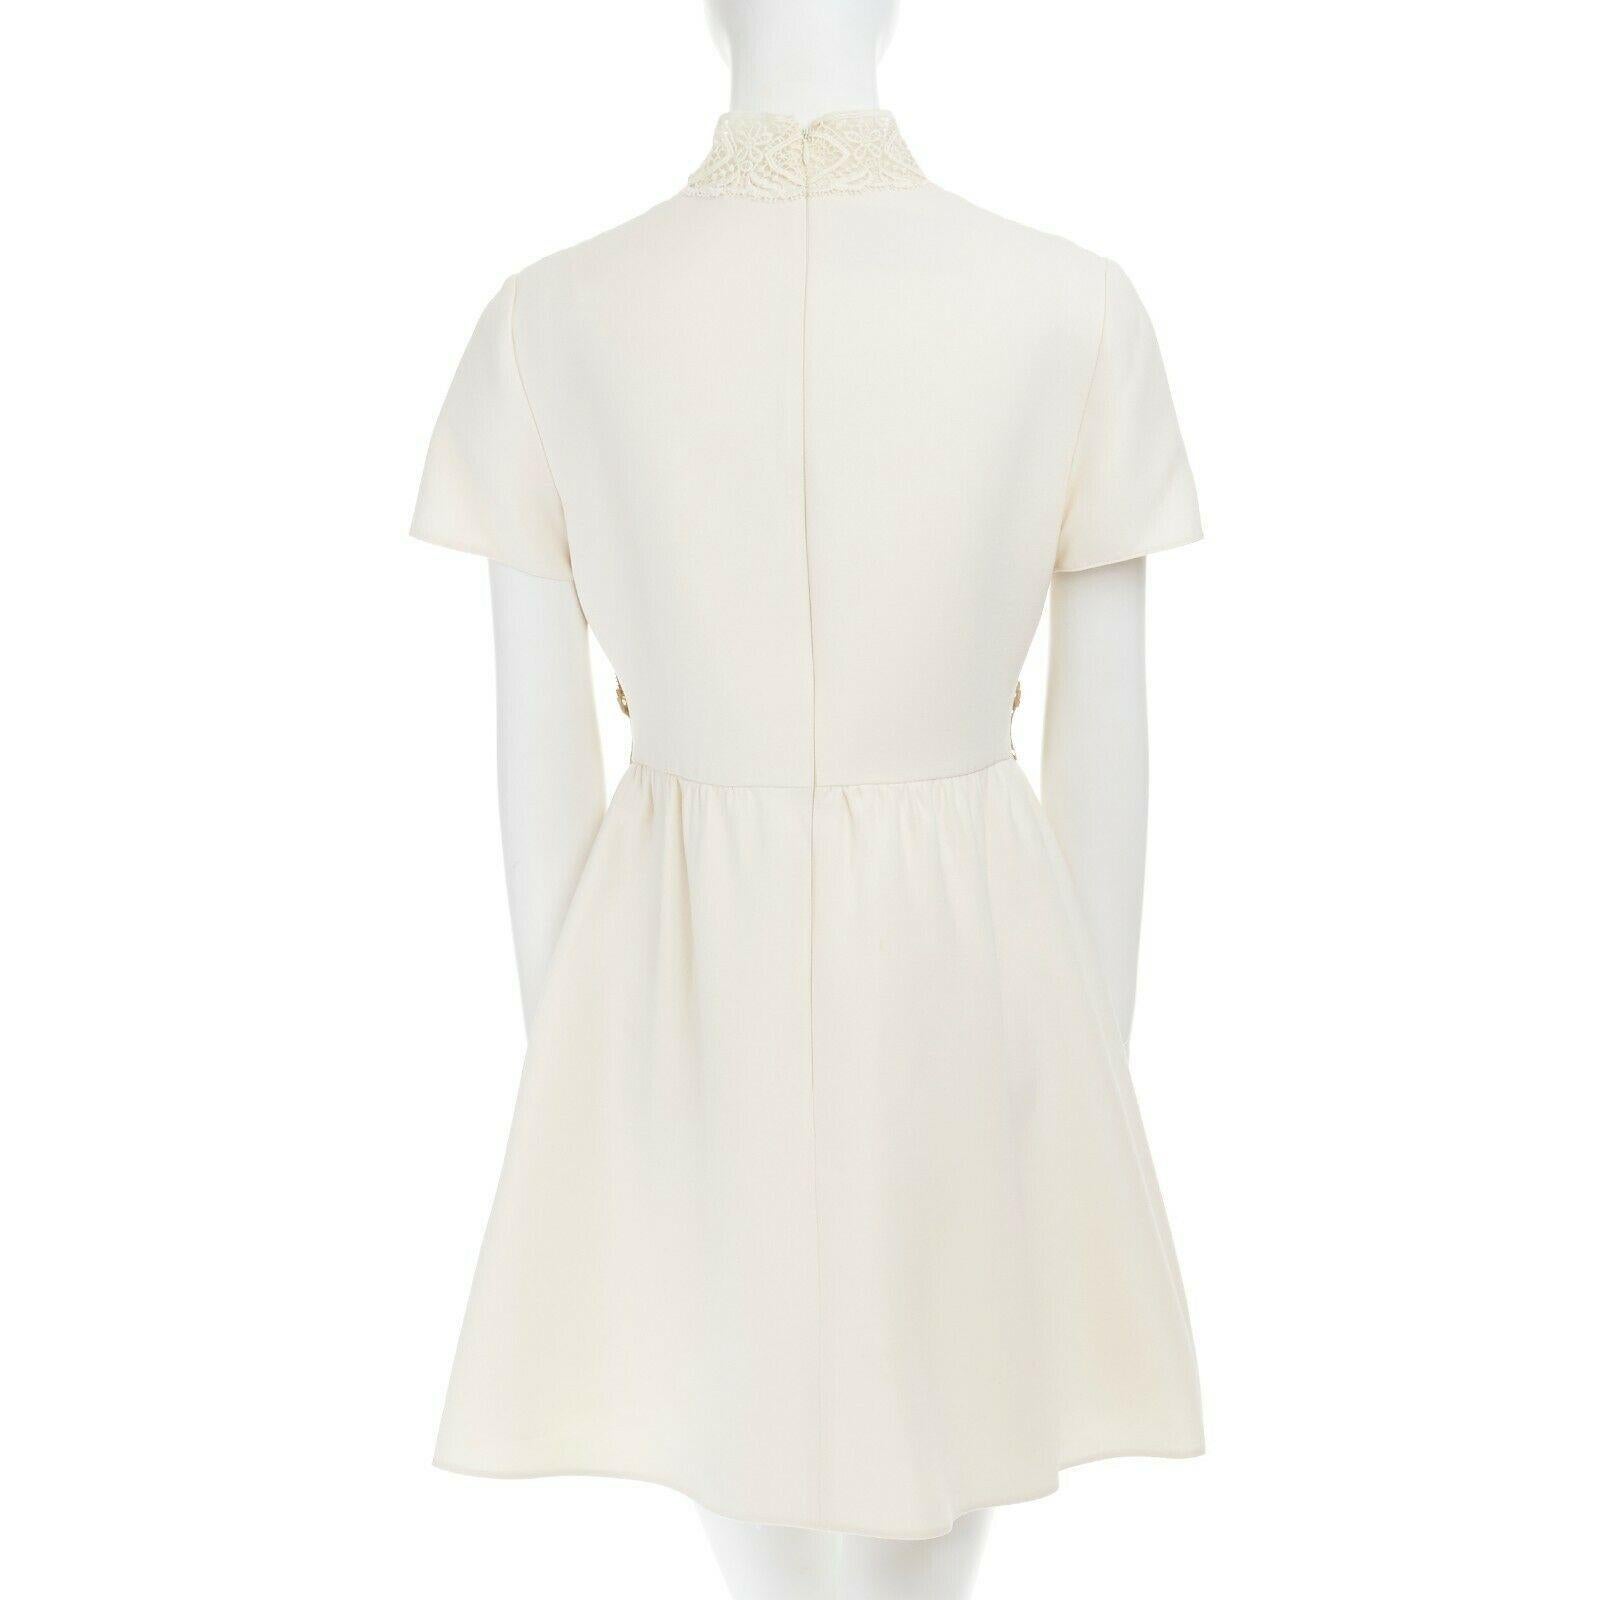 VALENTINO cream wool silk crepe embroidered lace high collar cocktail dress IT42 1